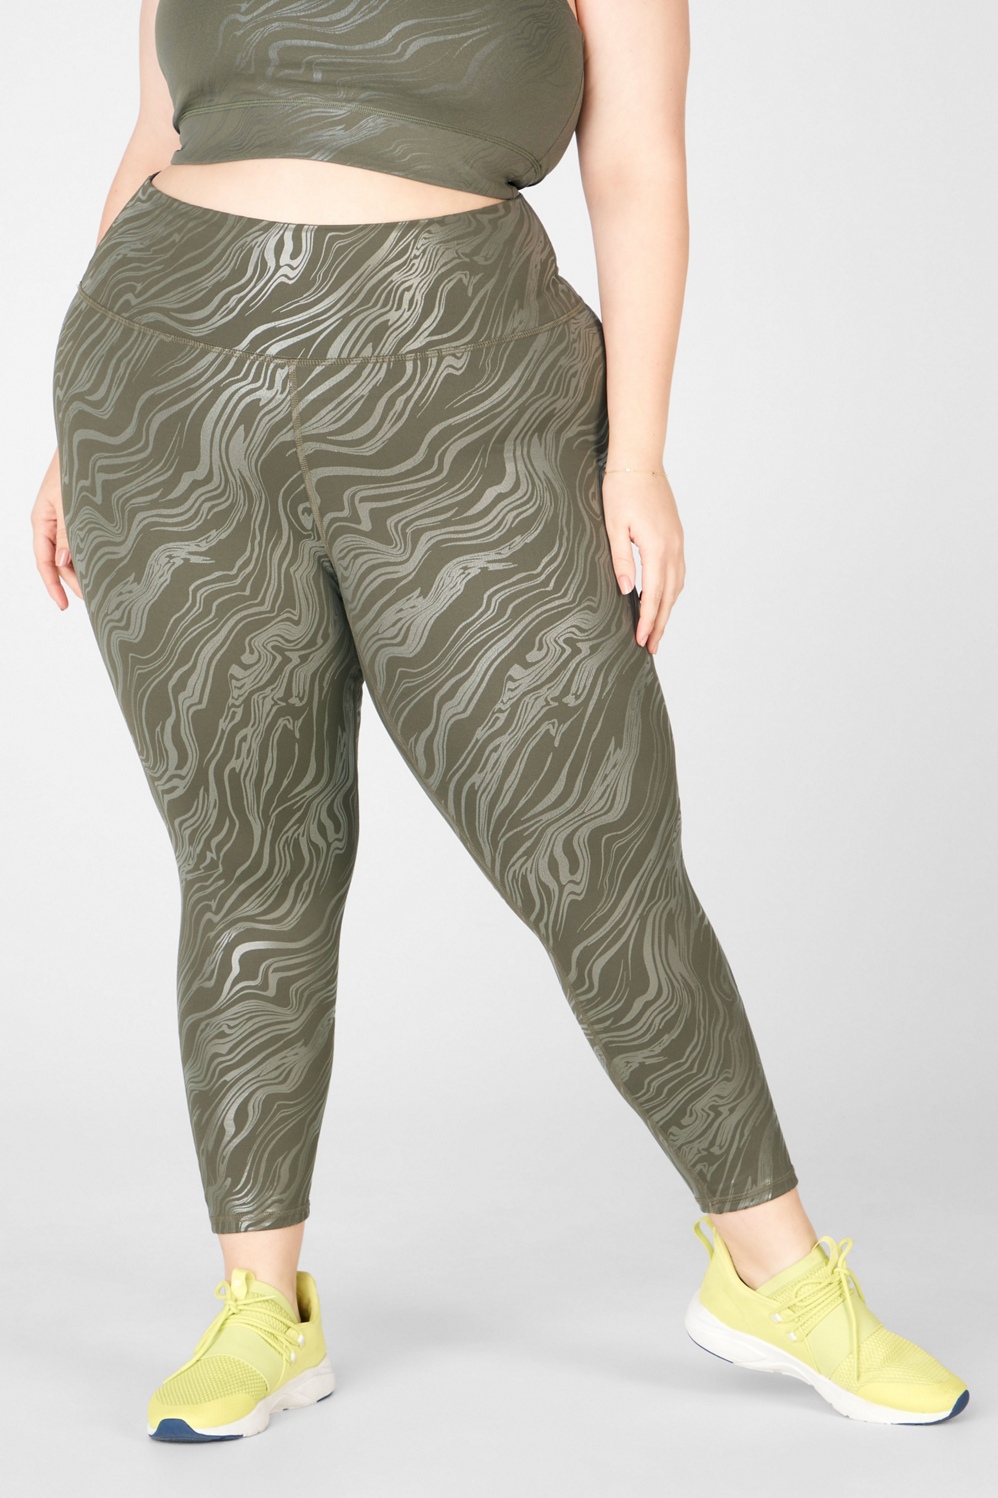 Fabletics High-Waisted PowerHold Leggings Green - $20 (71% Off Retail) -  From Brooke